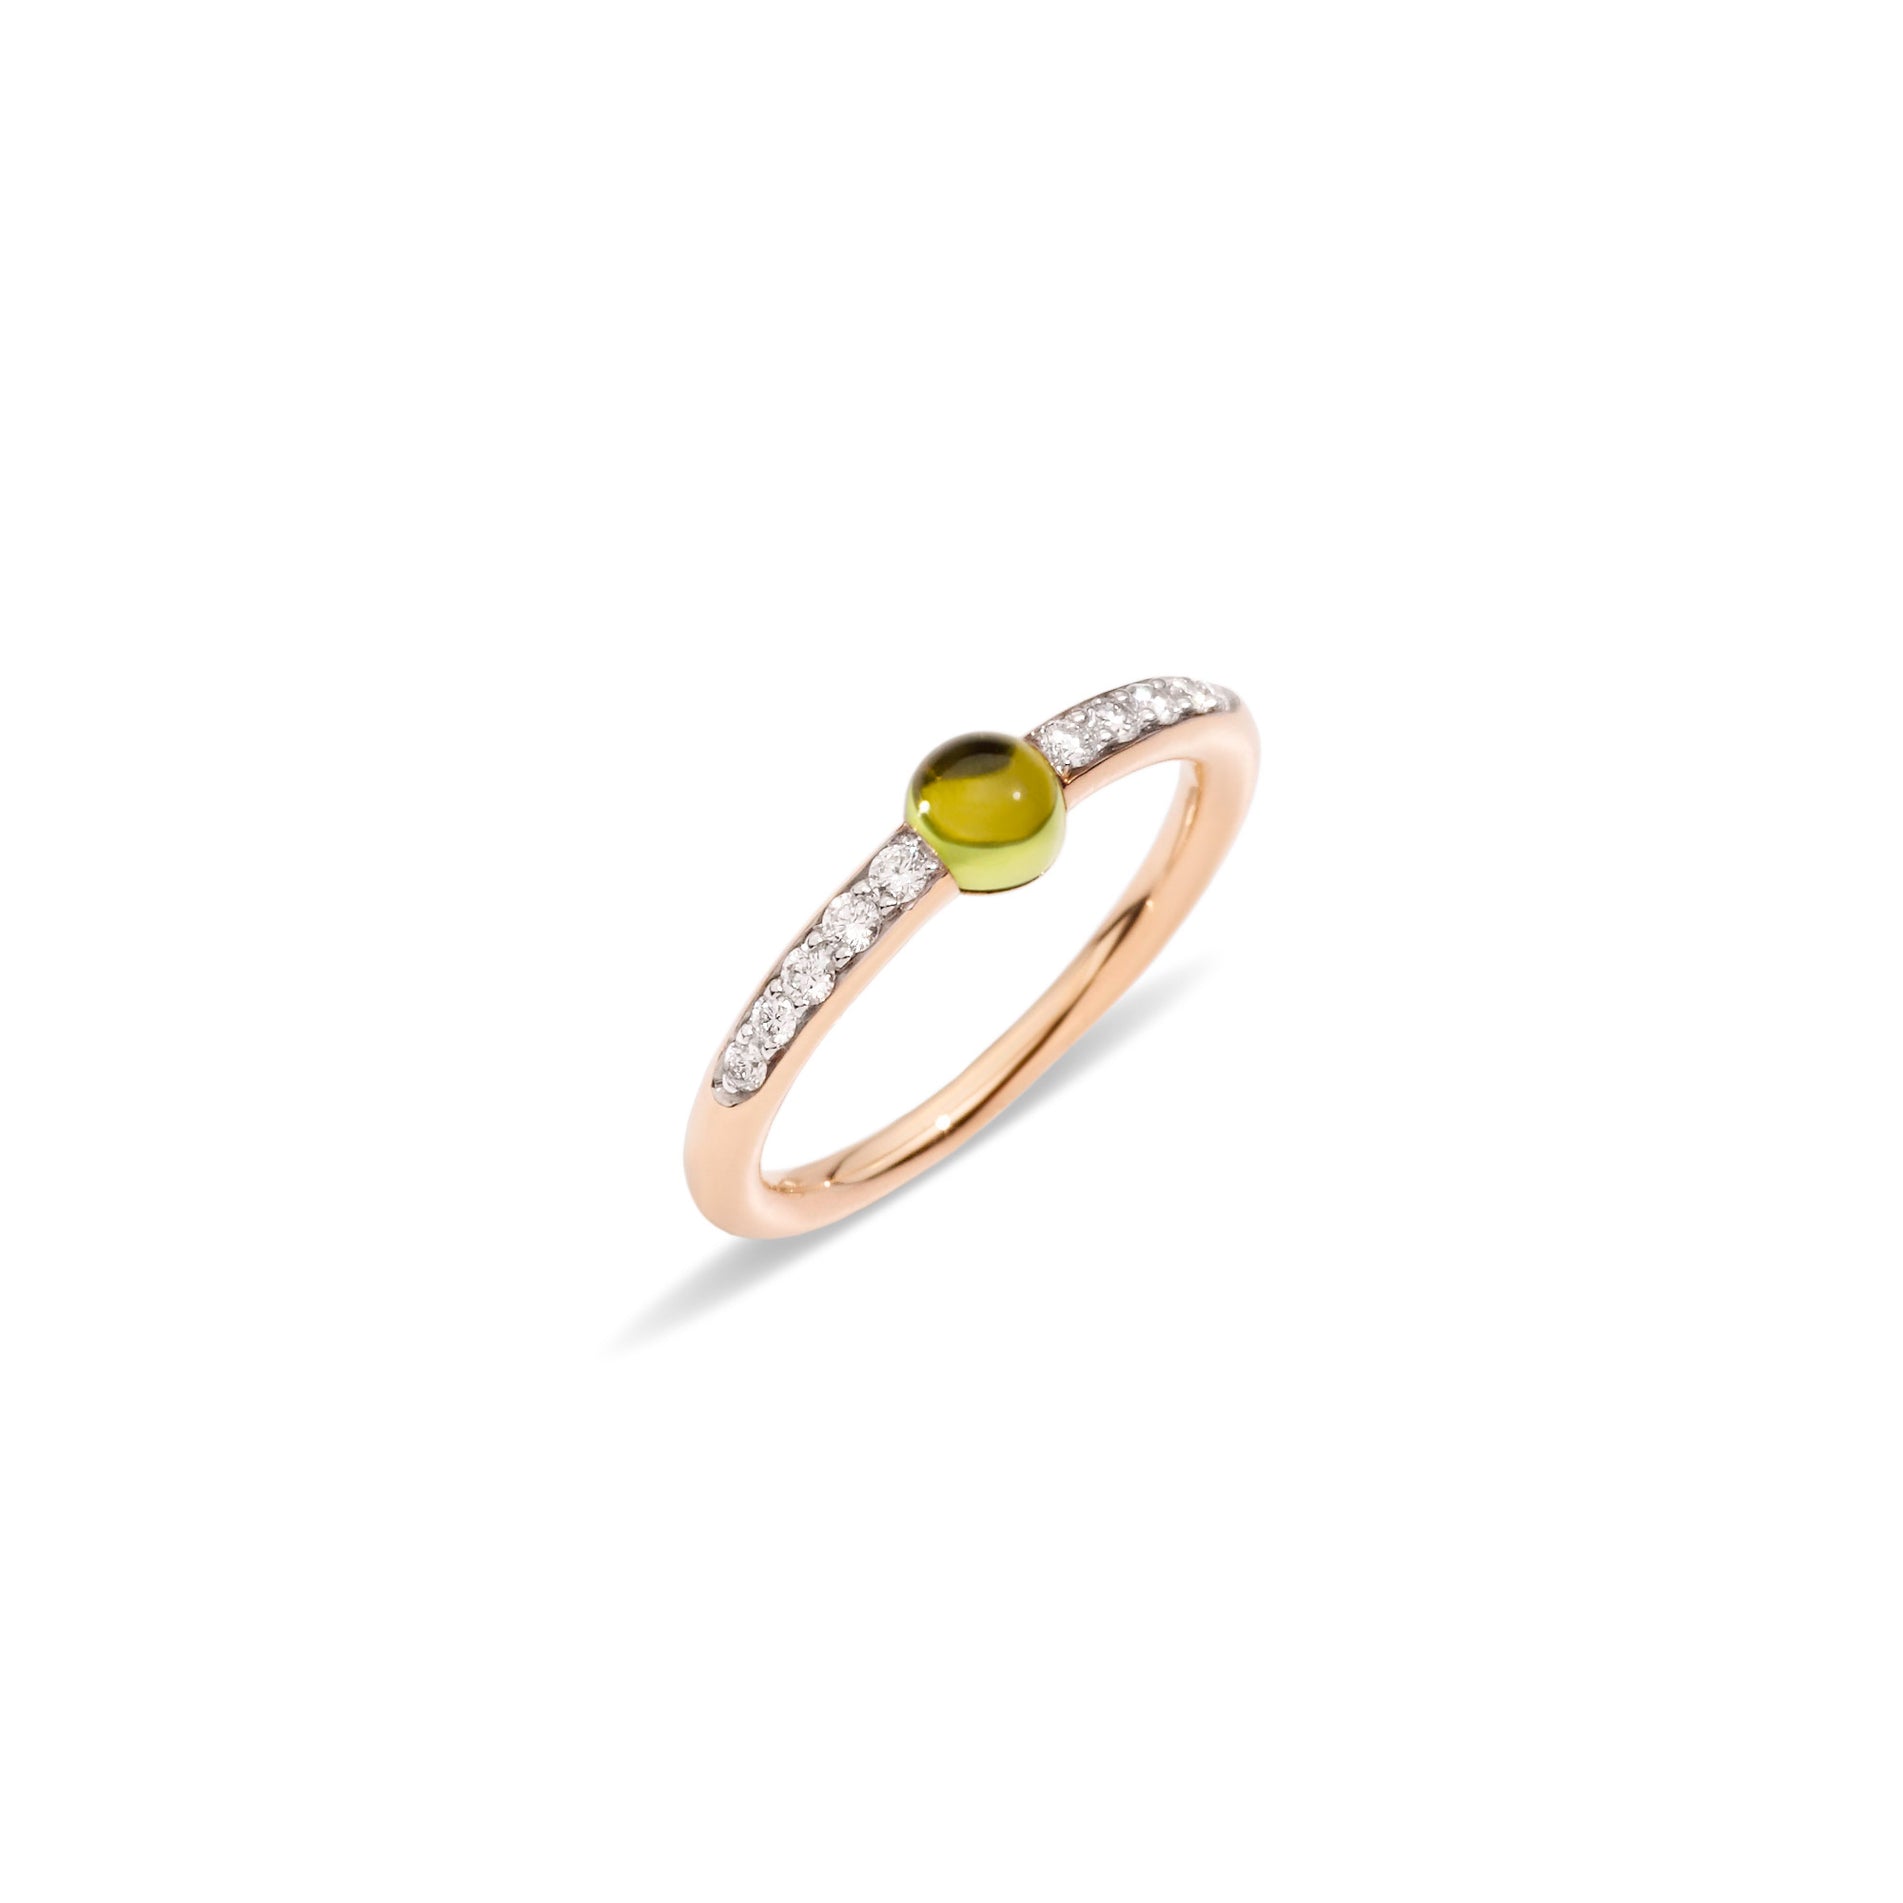 M'ama non M'ama Ring in 18k Rose Gold with Peridot and Diamonds - Orsini Jewellers NZ